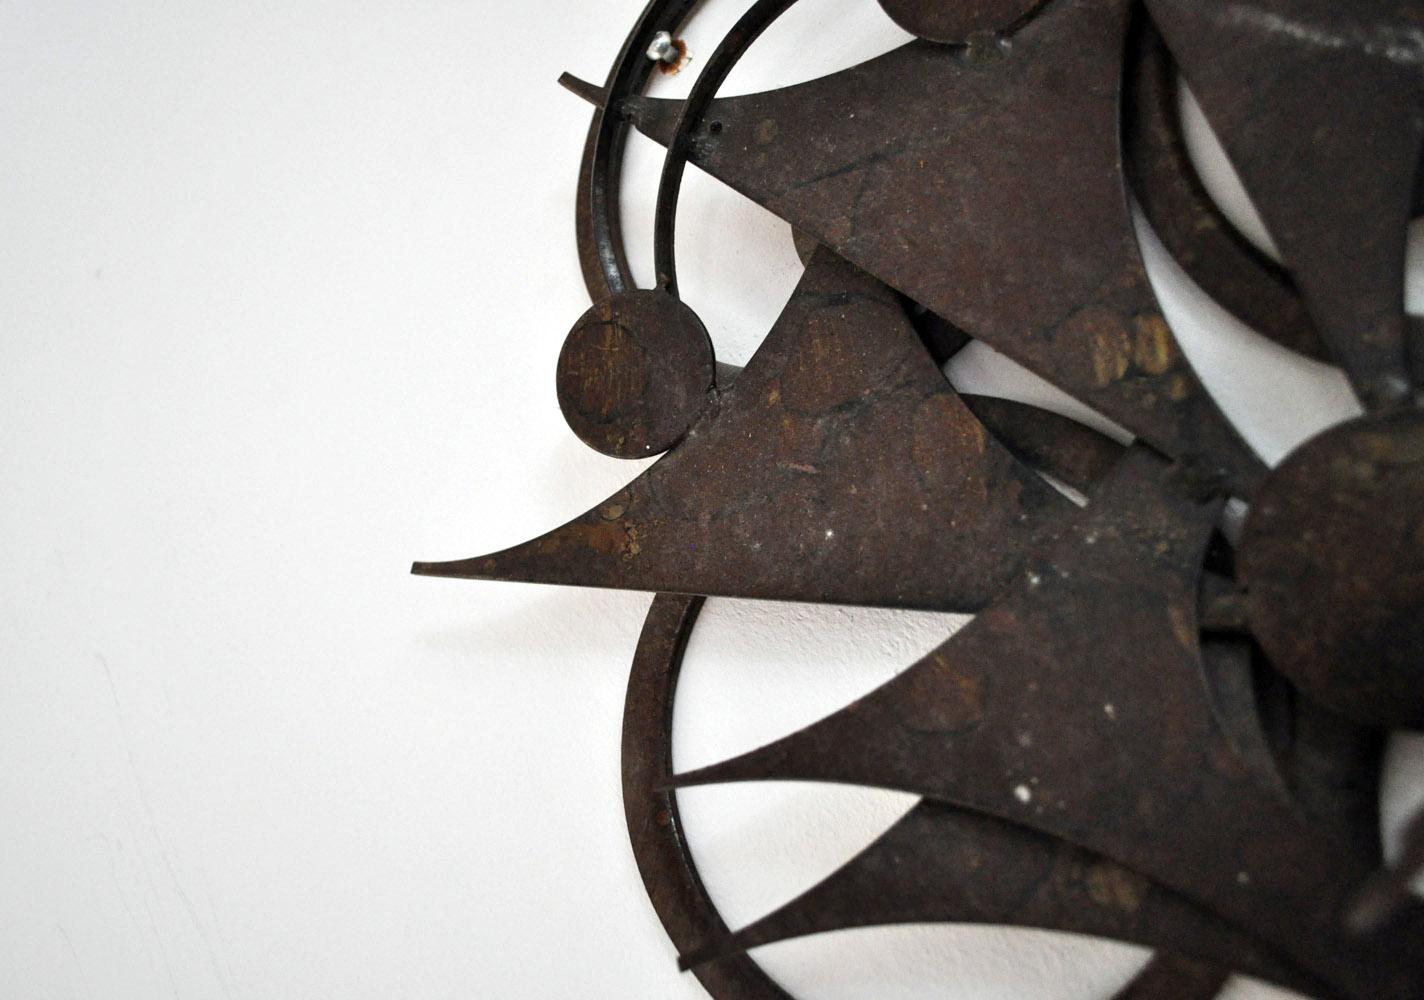 Wall sculpture in metal by Henrik Horst, Denmark, 1970s.
Cut steel with lacquered and acid treated finish.

Good condition with signs of age and patination.